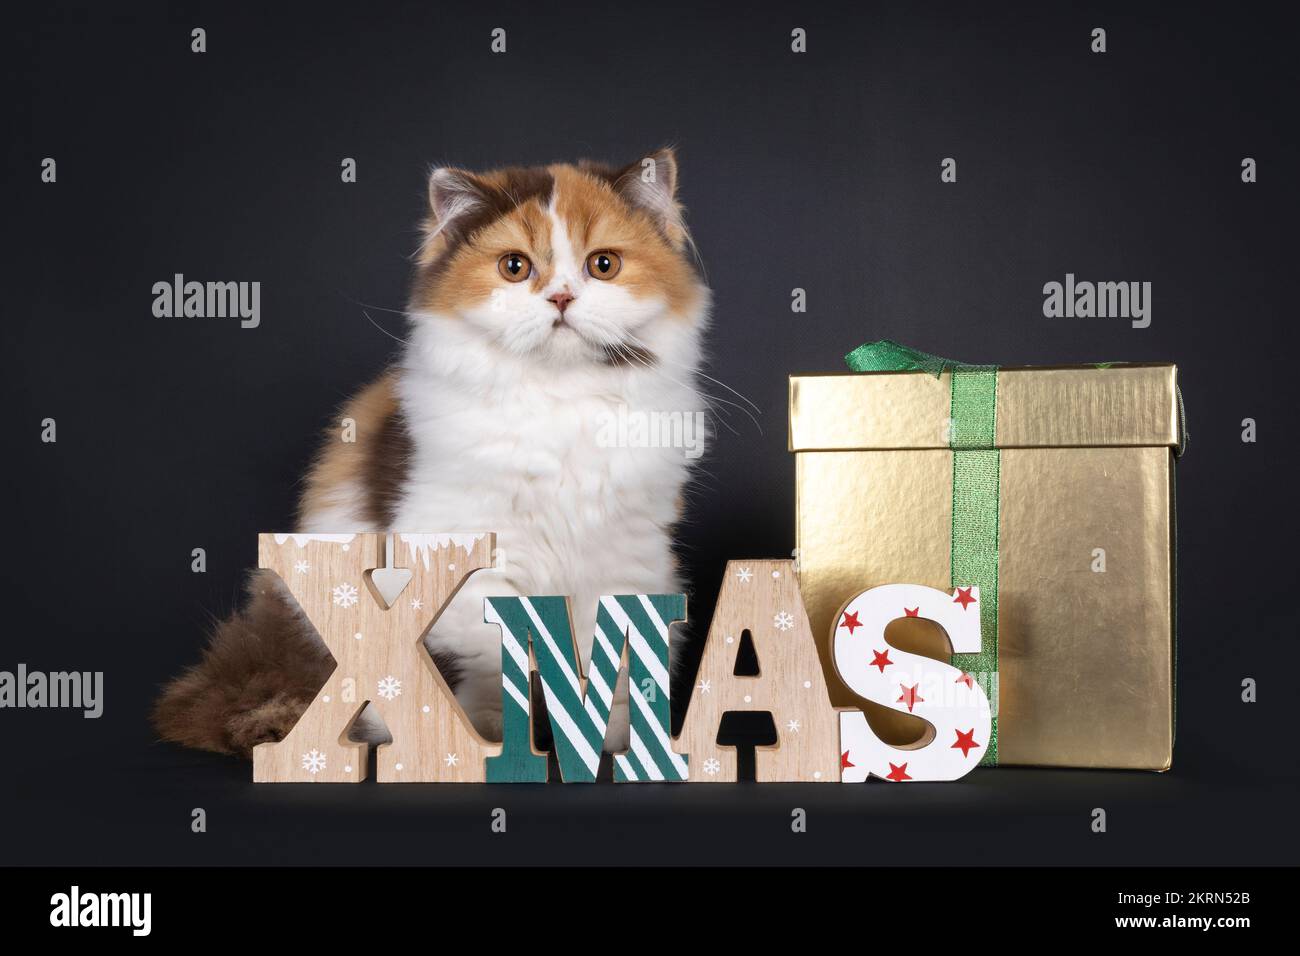 Cute tortie British Longhair cat kitten, sitting up side ways behind wooden xmas text and golden present box. Looking towards camera. Isolated on a bl Stock Photo